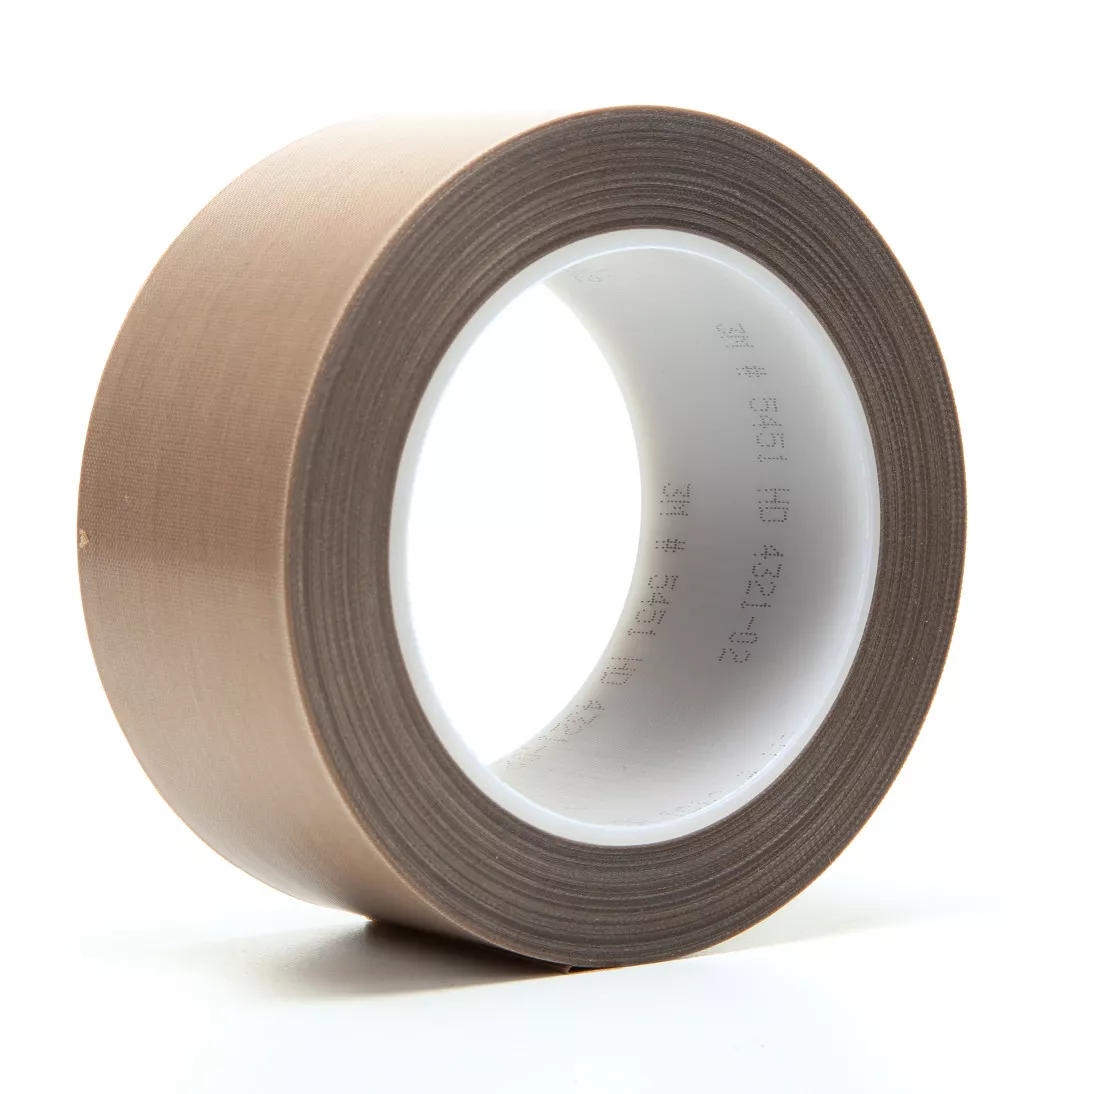 3M™ PTFE Glass Cloth Tape 5451, Brown, 2 in x 36 yd, 5.6 mil, 6 Roll/Case, Boxed